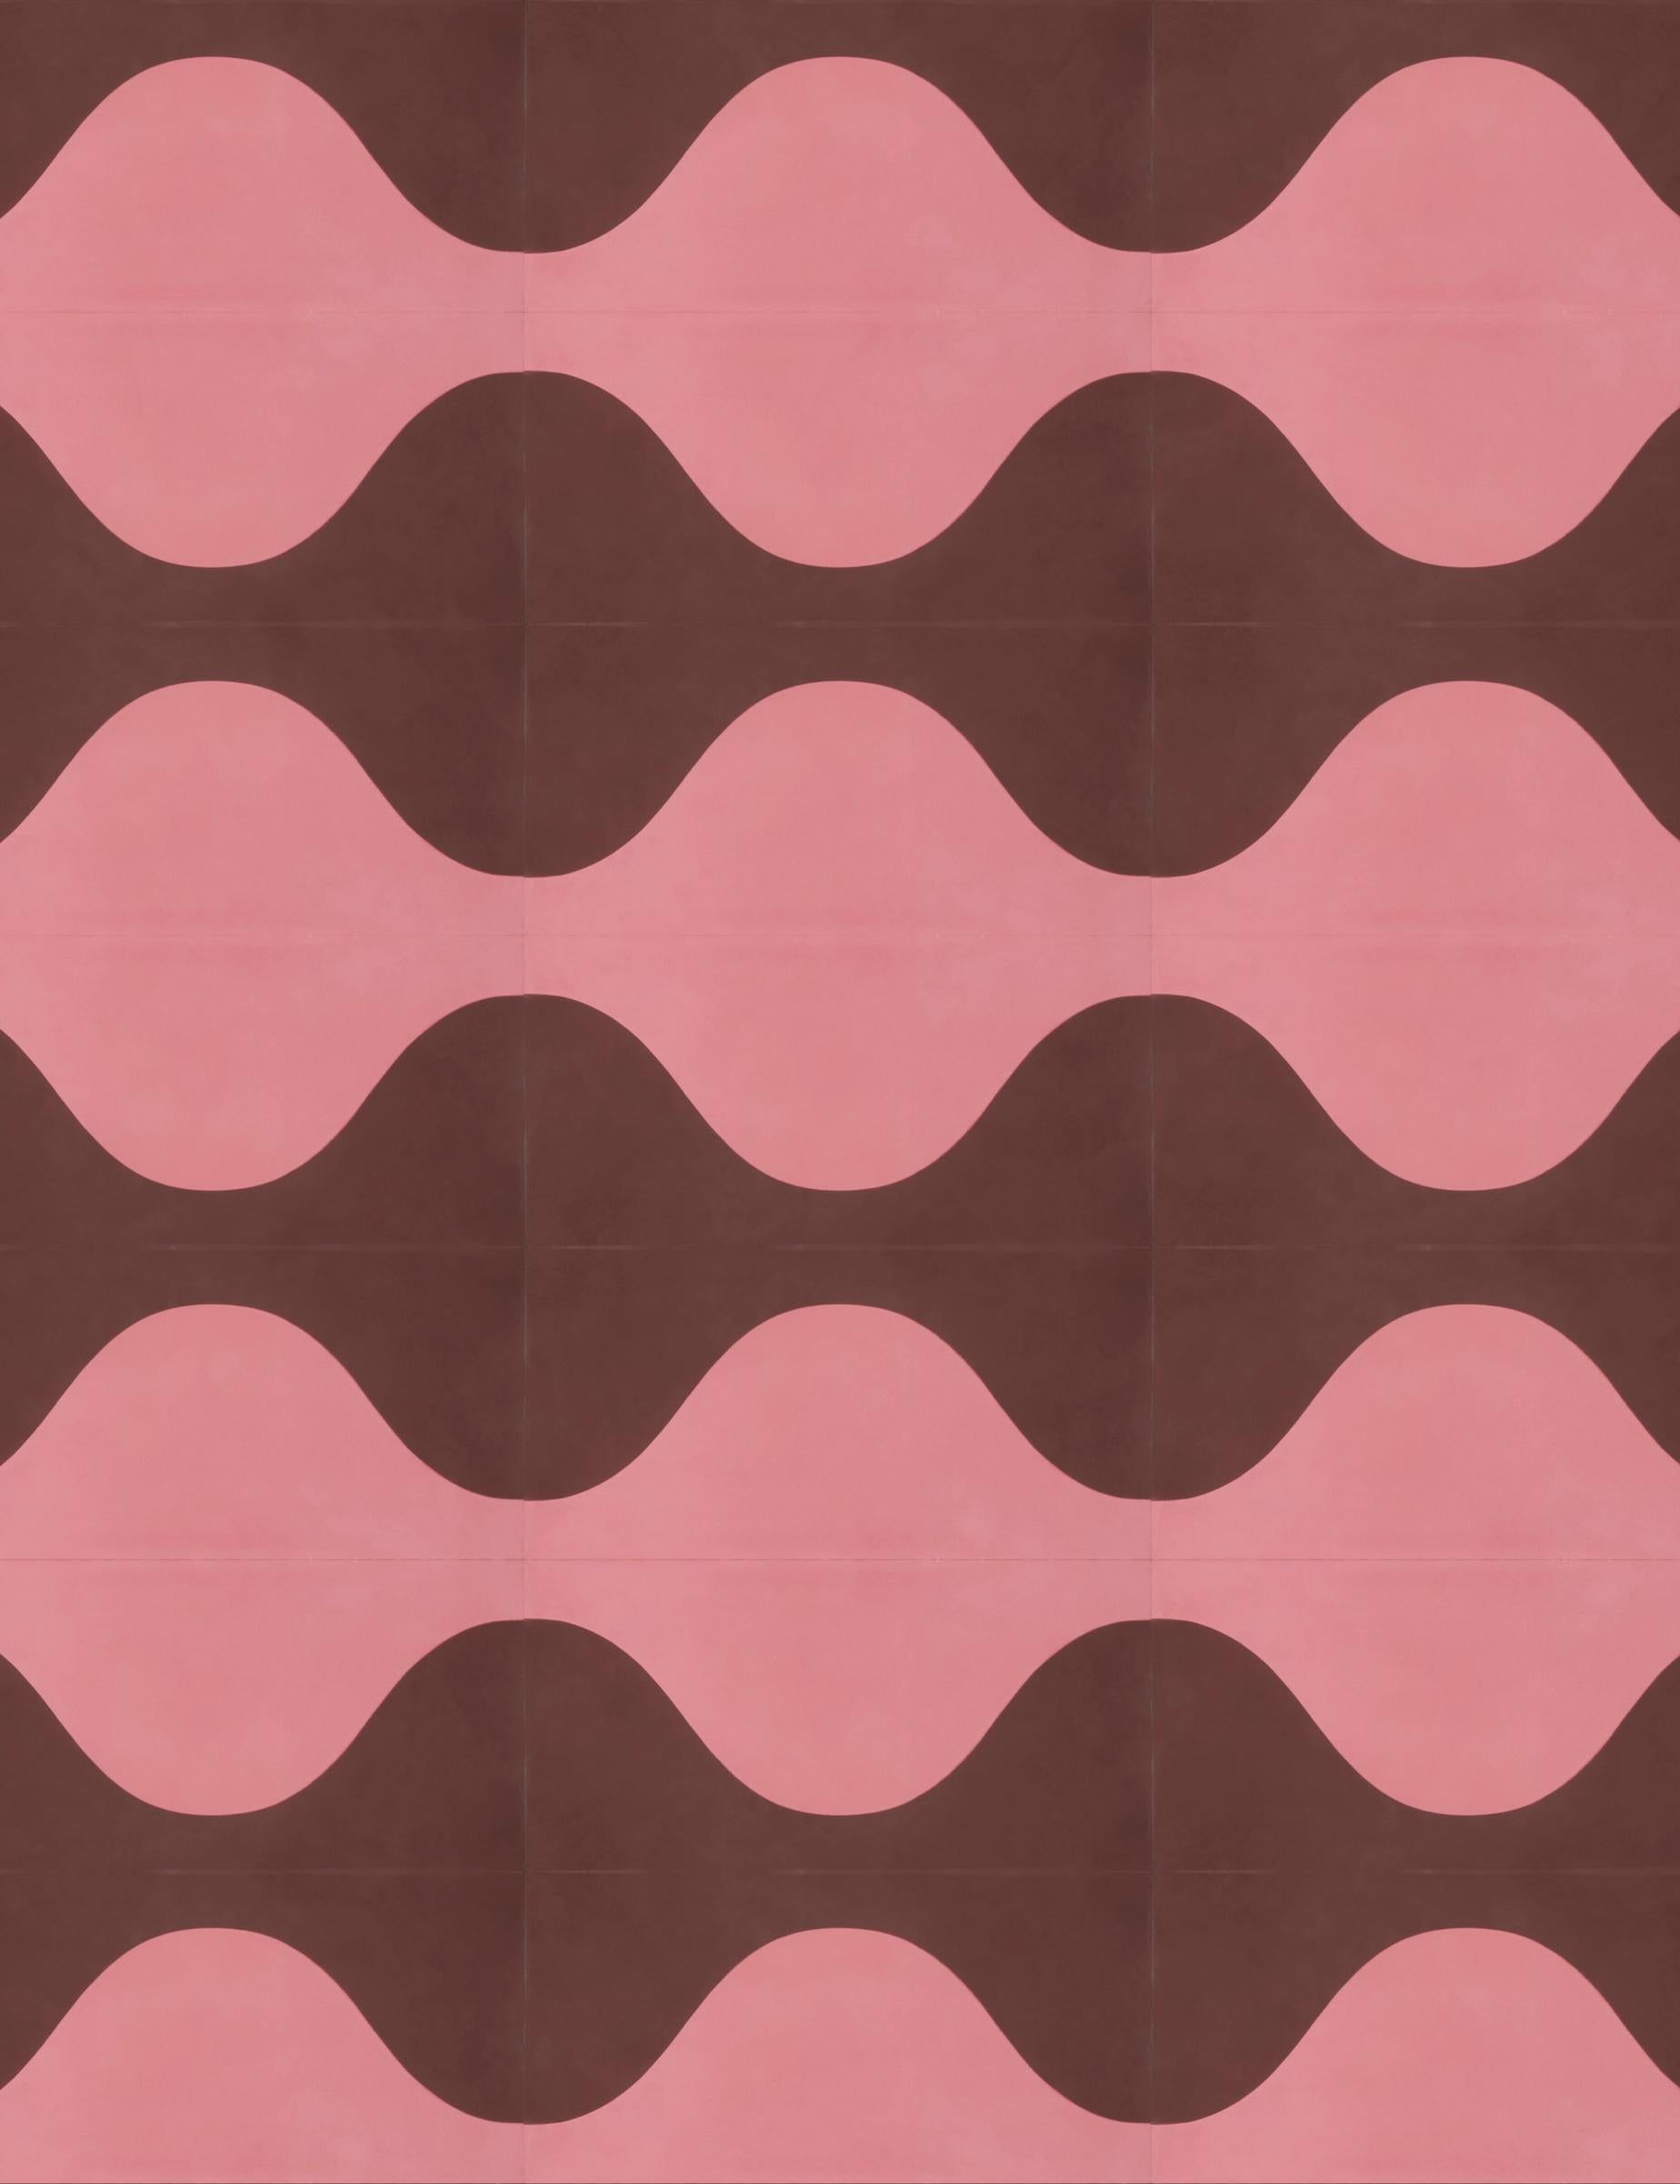 A wavy modular retro pattern that can be mixed and matched to create a dual-color or ombré pattern. 

Cement Tiles
Type: Encaustic cement tile
Production process: Hydraulic pressing process
Materials: White cement, stone powder, additives, grey